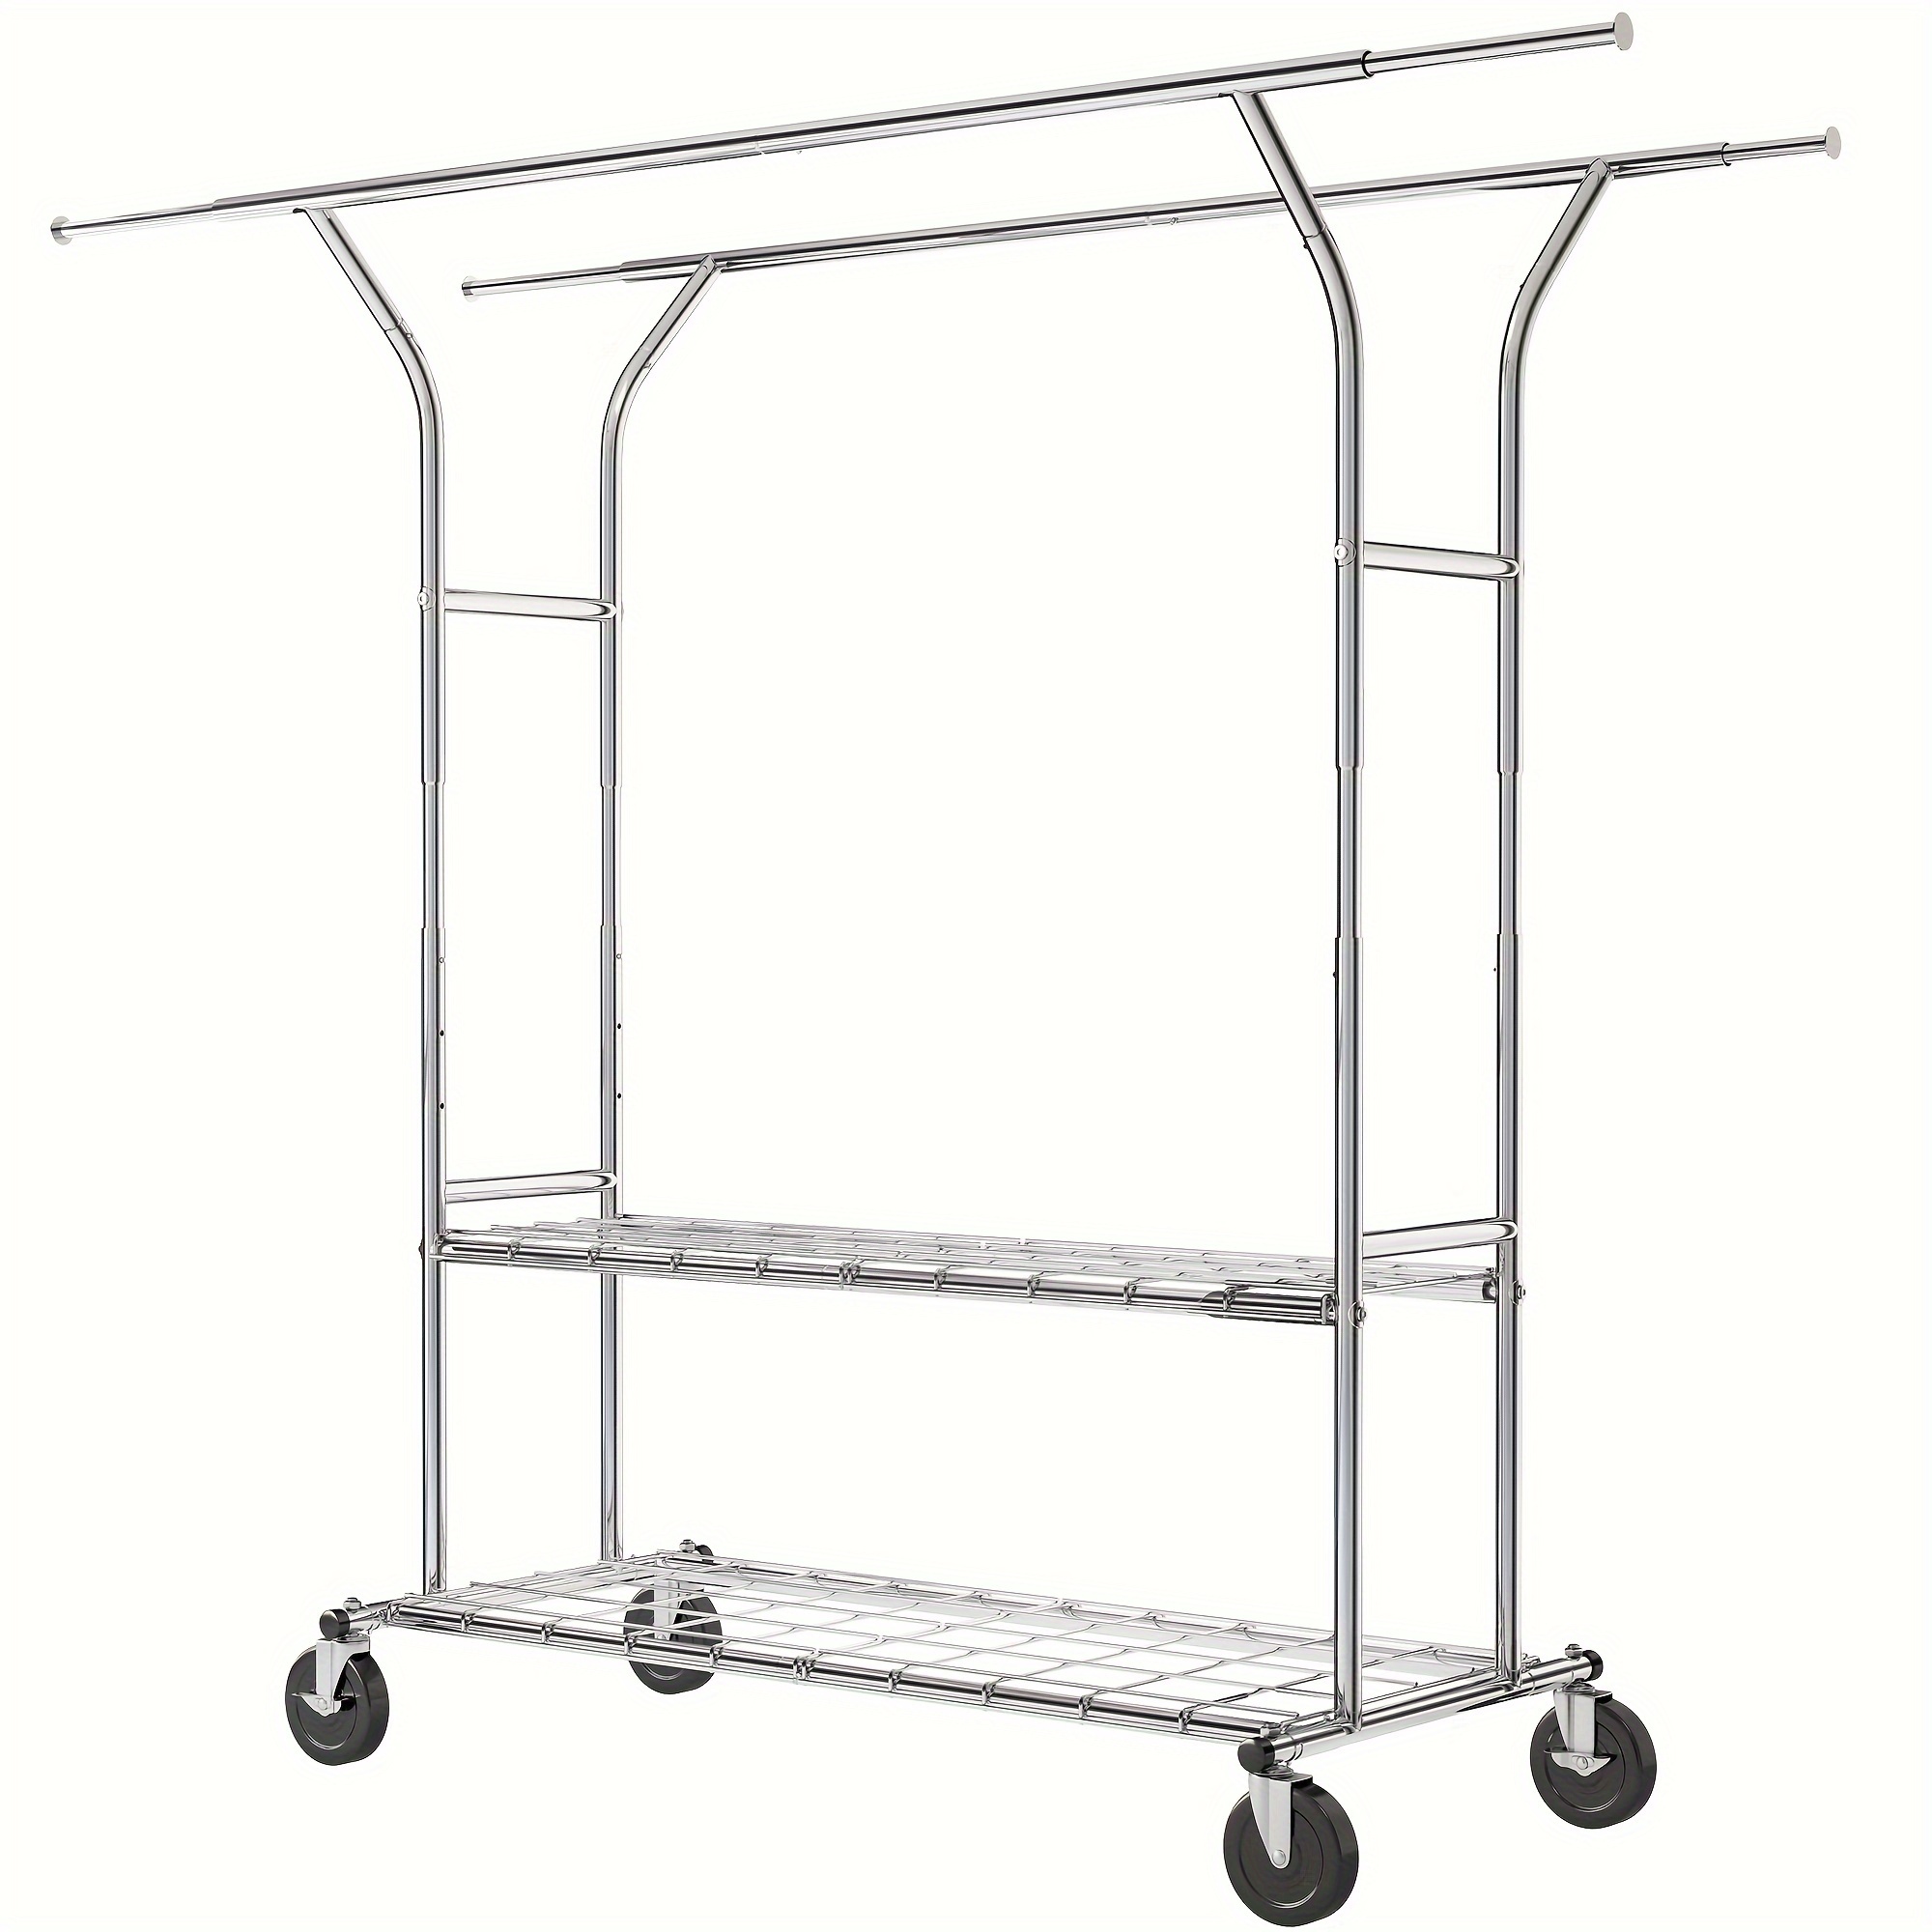 

Clothes Rack Heavy Duty Clothing Rack With Wheels Load 630lbs Clothing Racks For Hanging Clothes Rolling Clothes Rack Adjustable Garment Rack Commercial Portable Clothes Rack 74.6" Wx24.1" Dx70.1 H